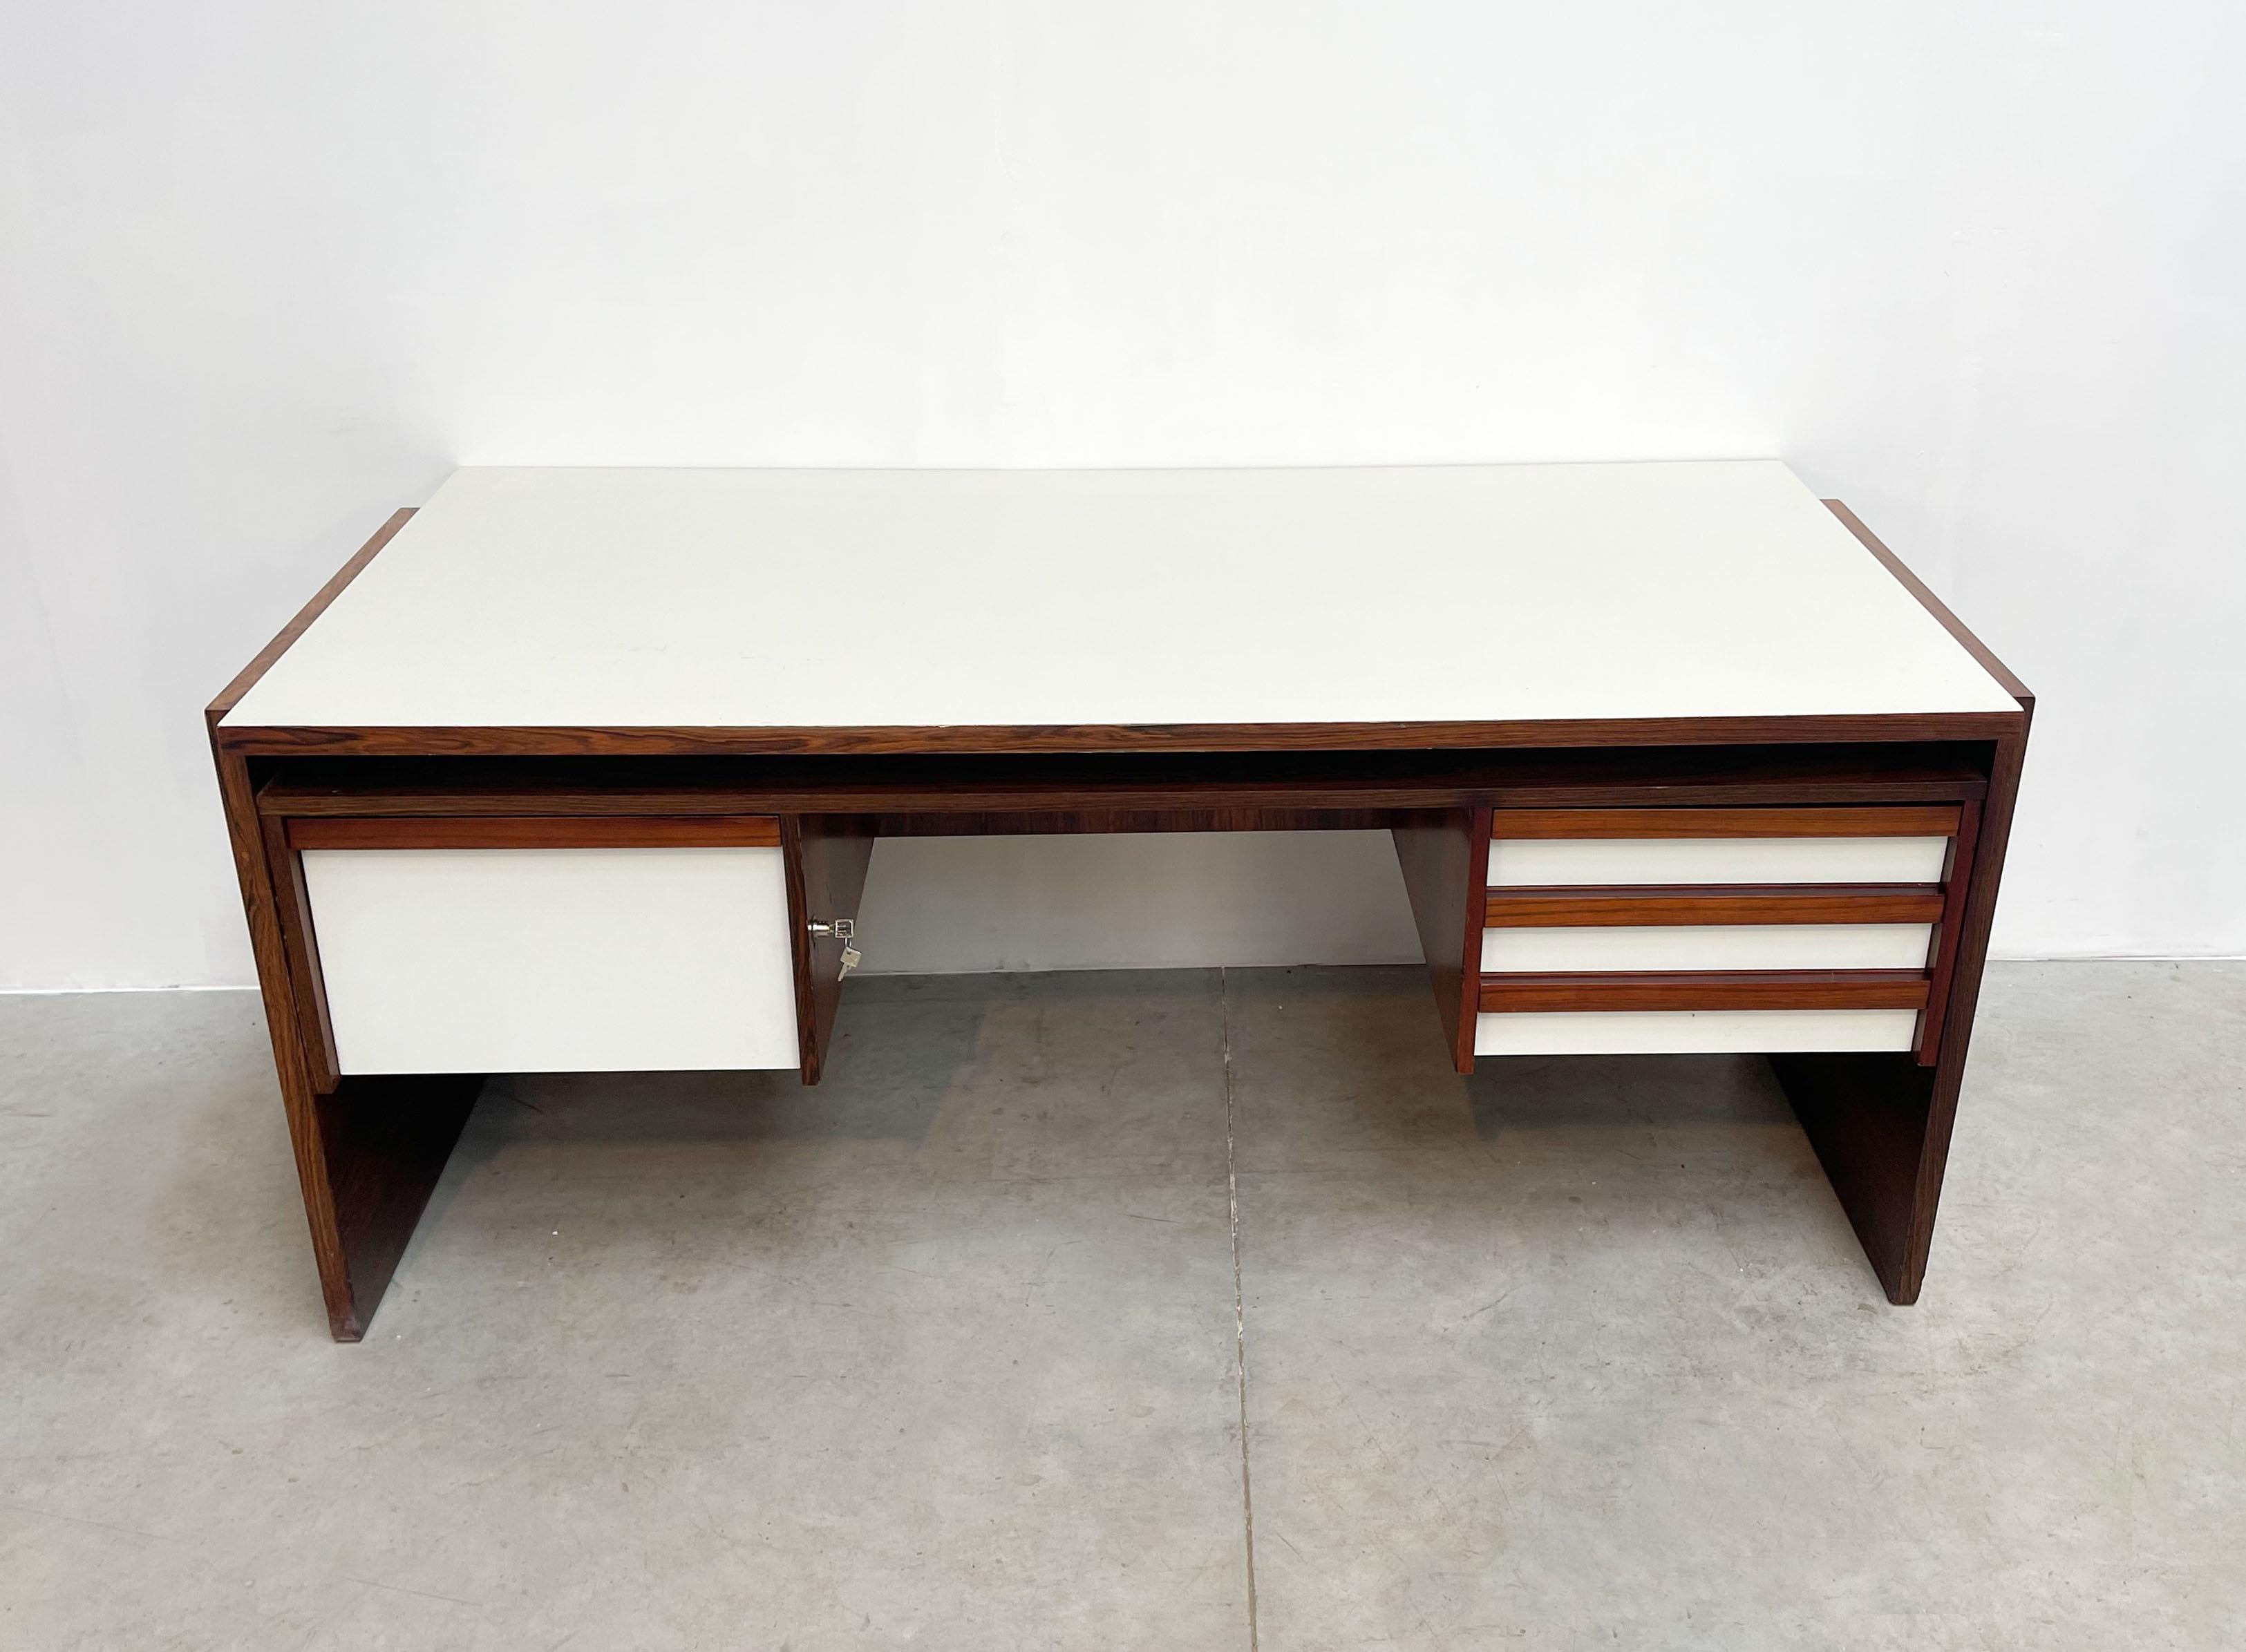 1970's Belgian desk
Beautiful Belgian desk with very nice veneer. The desk is unknown to us but was sold by the first owners as Oswald Vermaercke. The owners knew Vermaercke personally, they told us that this was made in his workshop. But this